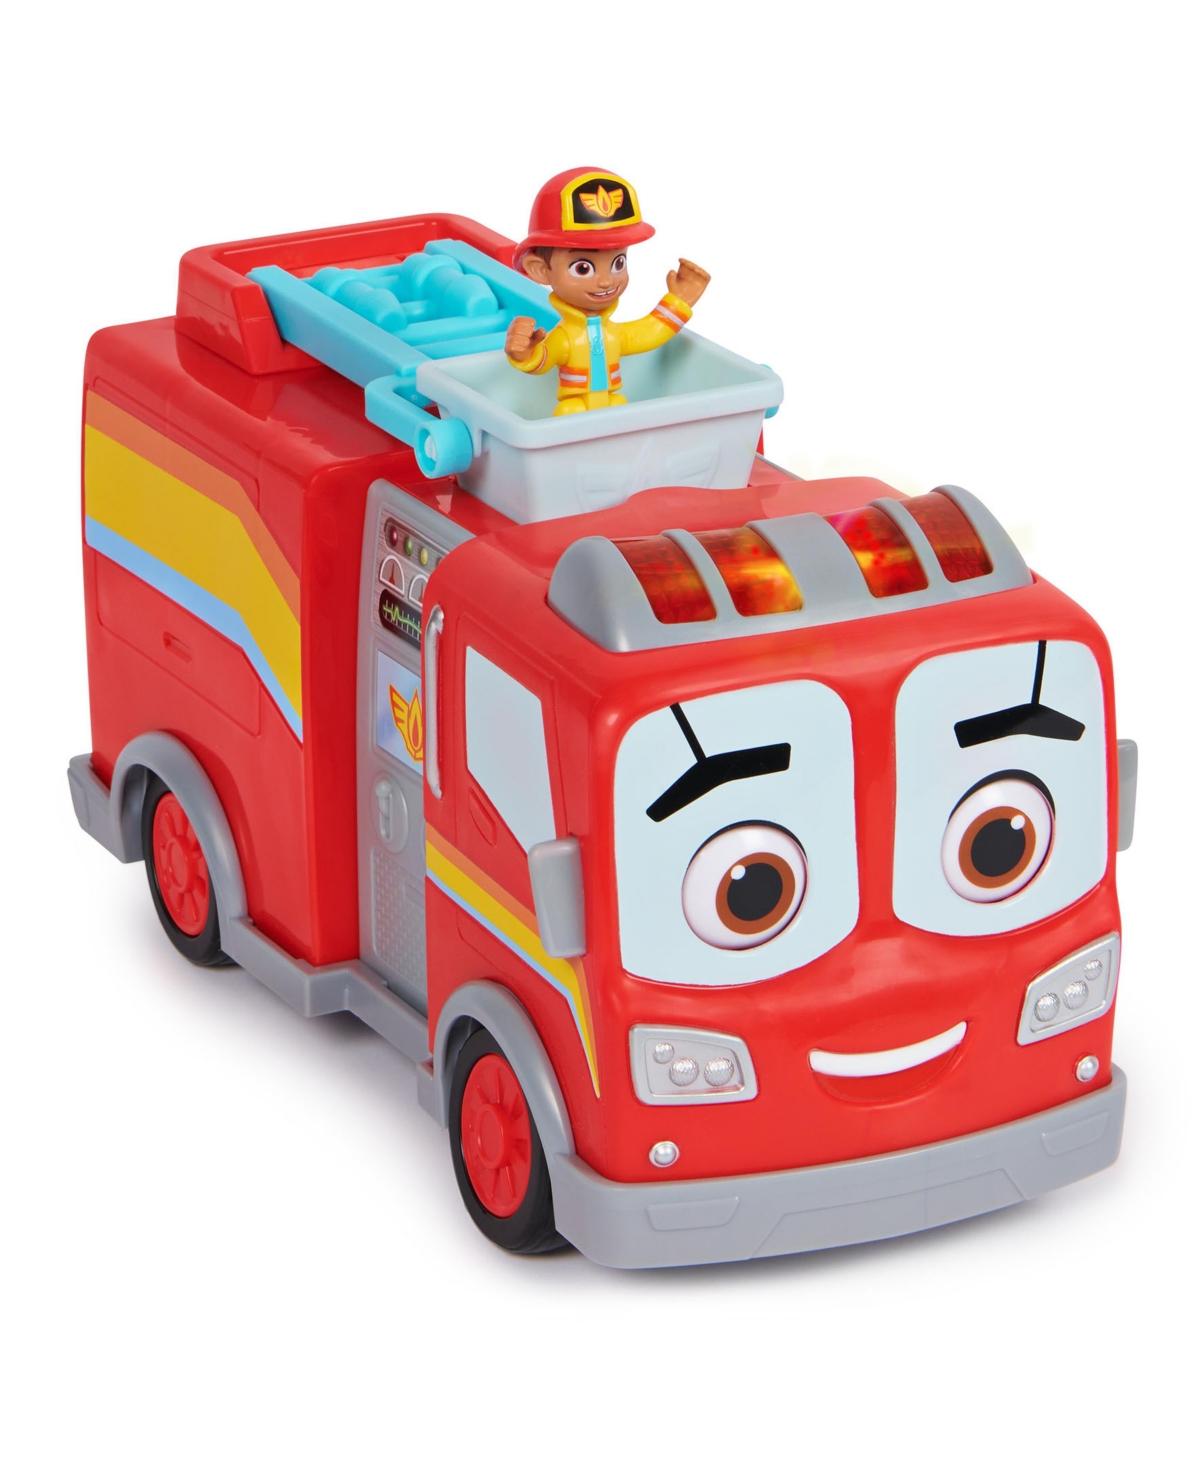 Firebuds Kids' , Bo Flash Rescue Adventure Fire Truck With Vroomlink, Lights, Sounds, And Movements In Multi-color